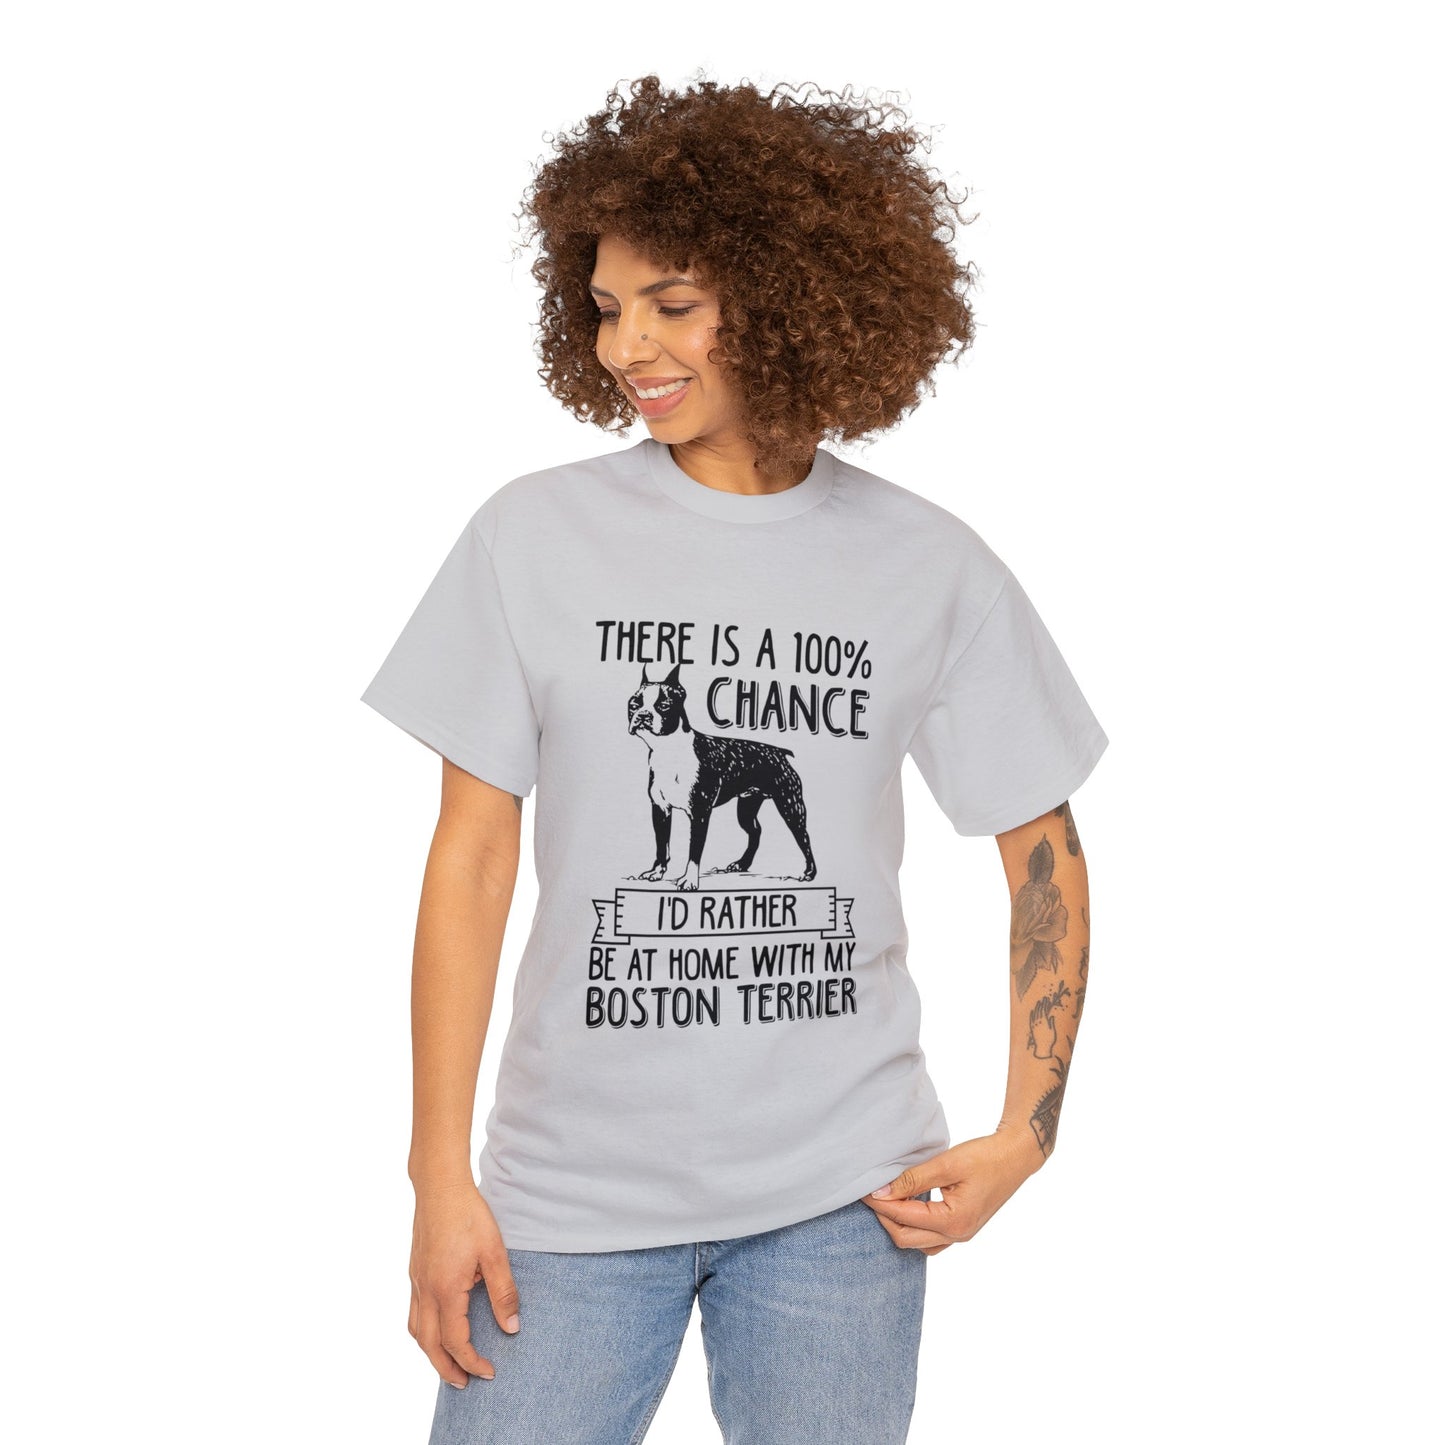 Charlie  - Unisex Tshirts for Boston Terrier Lovers